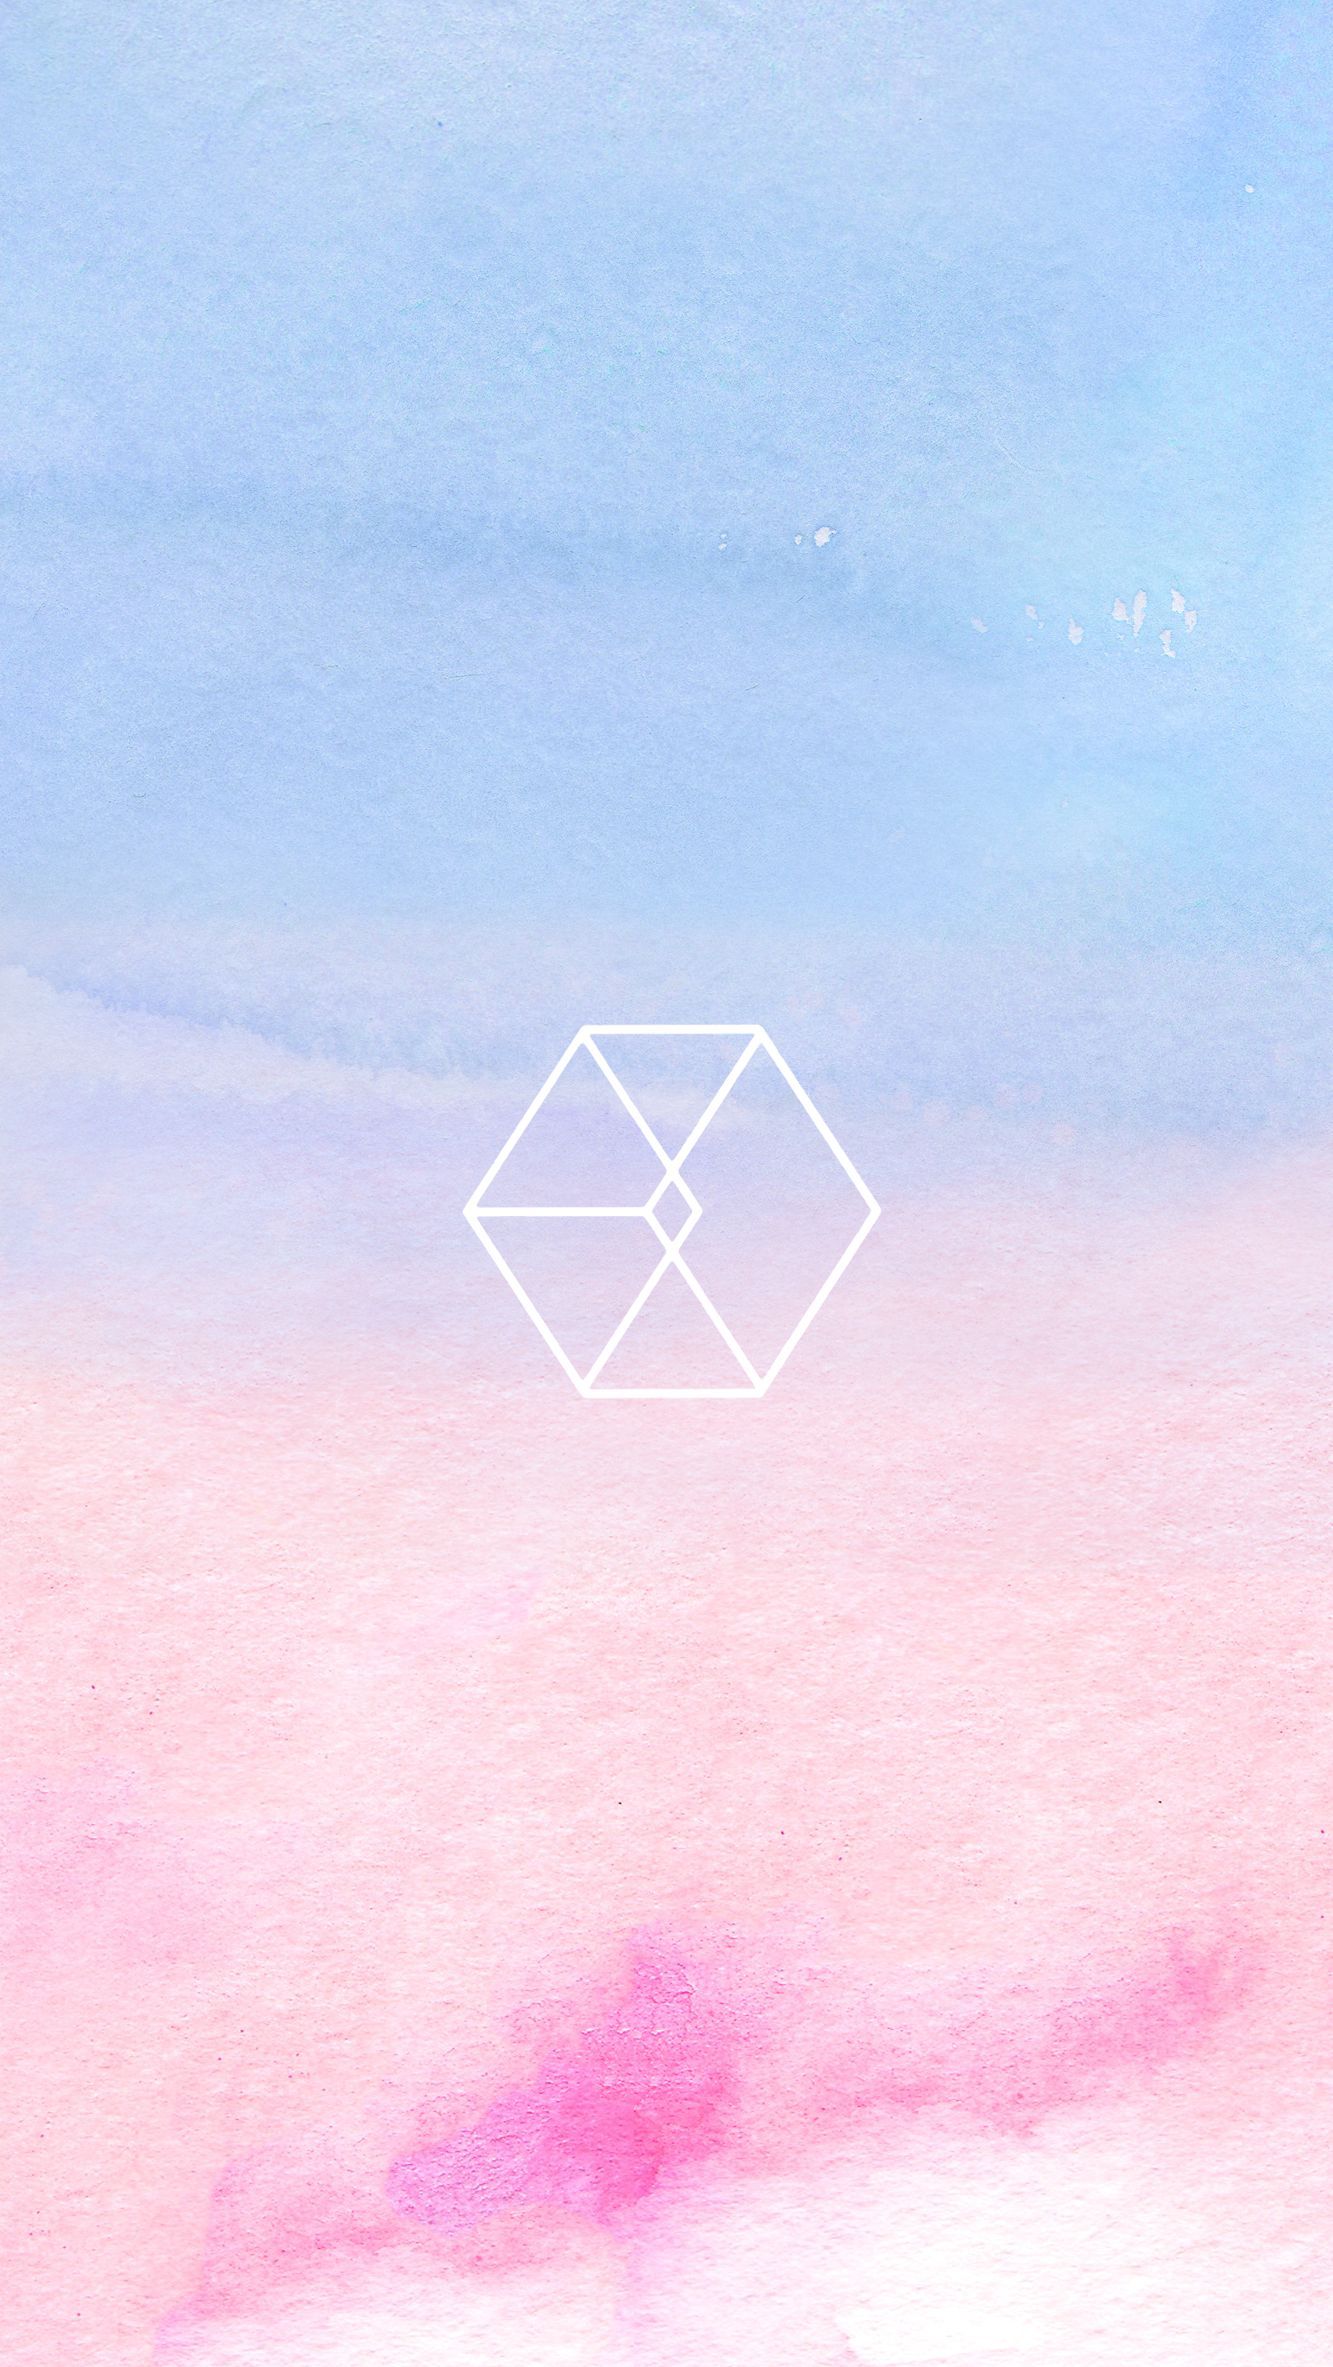 EXO's symbol over a pink and blue watercolor background